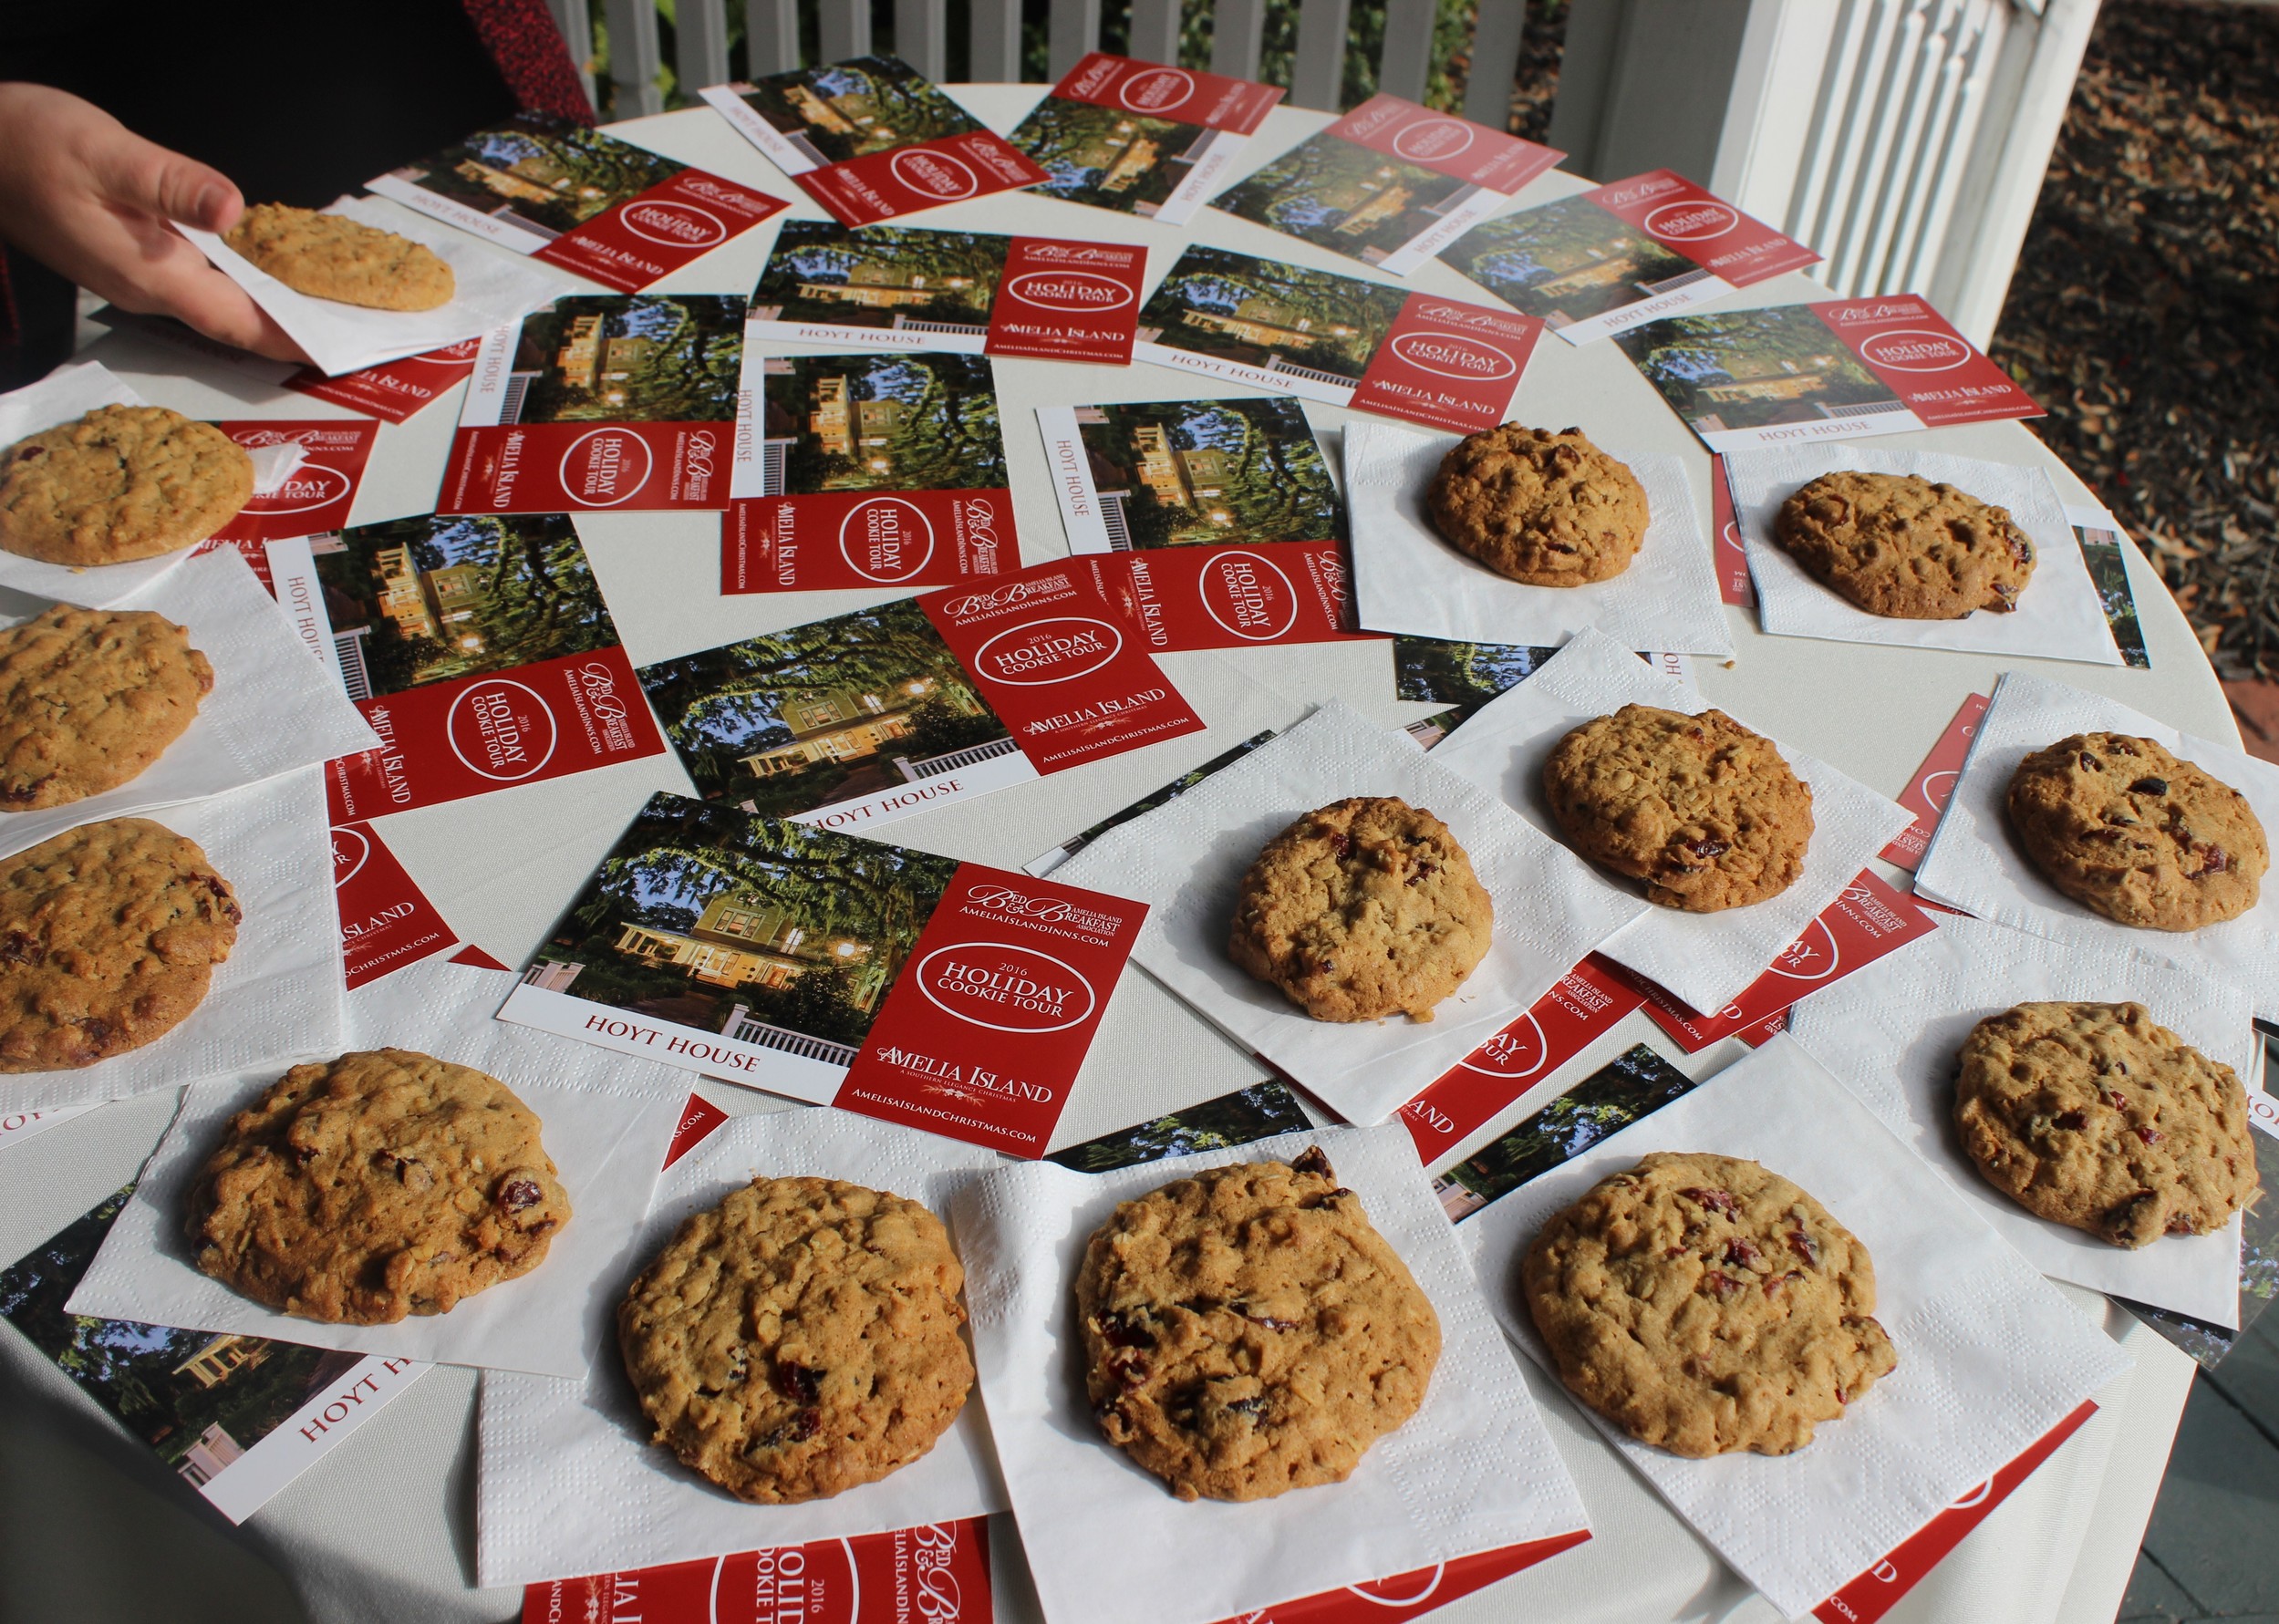 Cookies from the Hoyt House at Amelia Island’s Holiday Cookie Tour